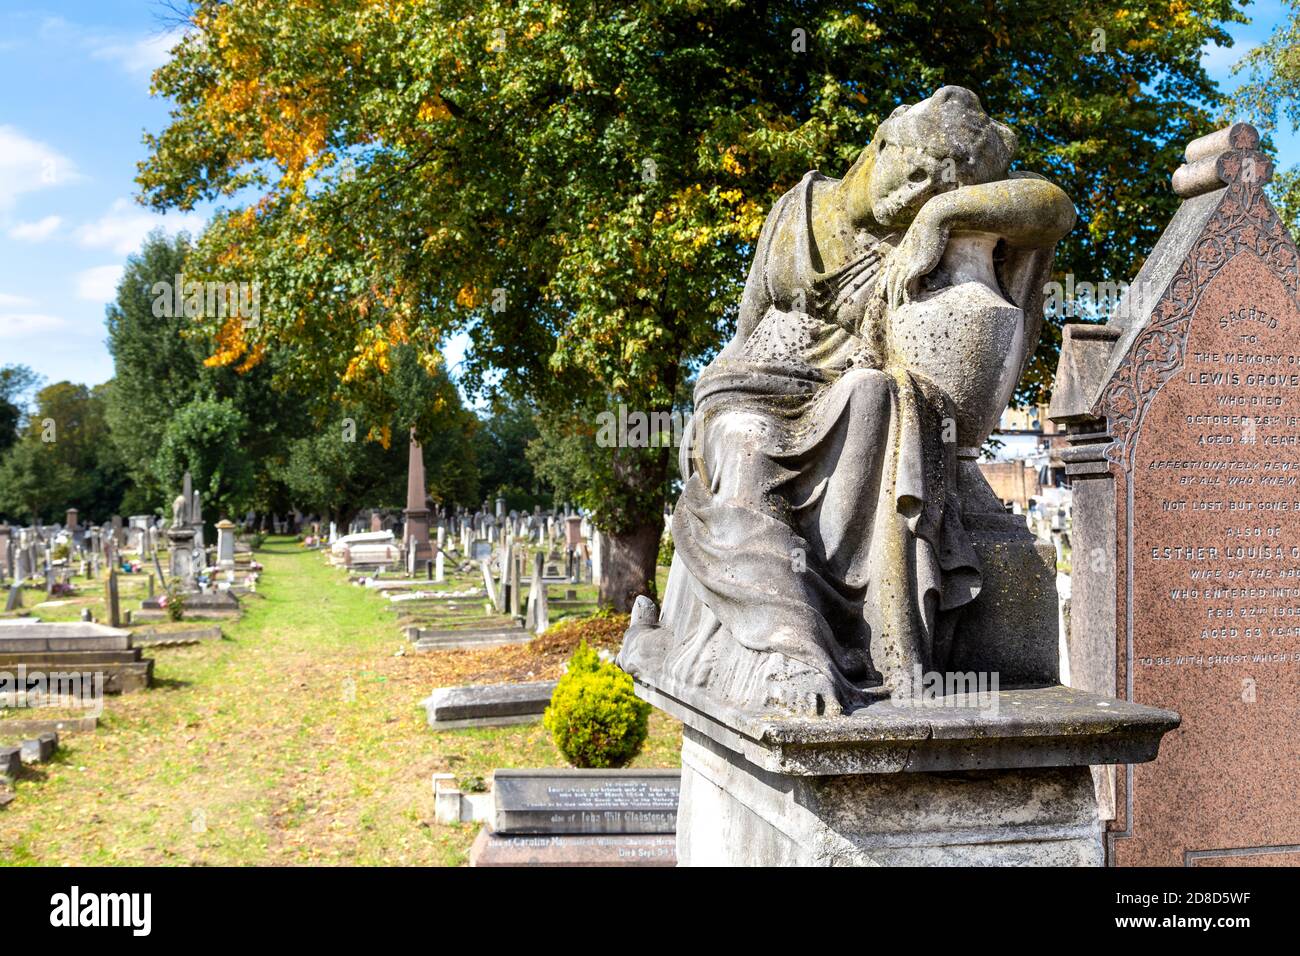 Funerary monument of mourning woman at Kensal Green Cemetery in autumn, London, UK Stock Photo